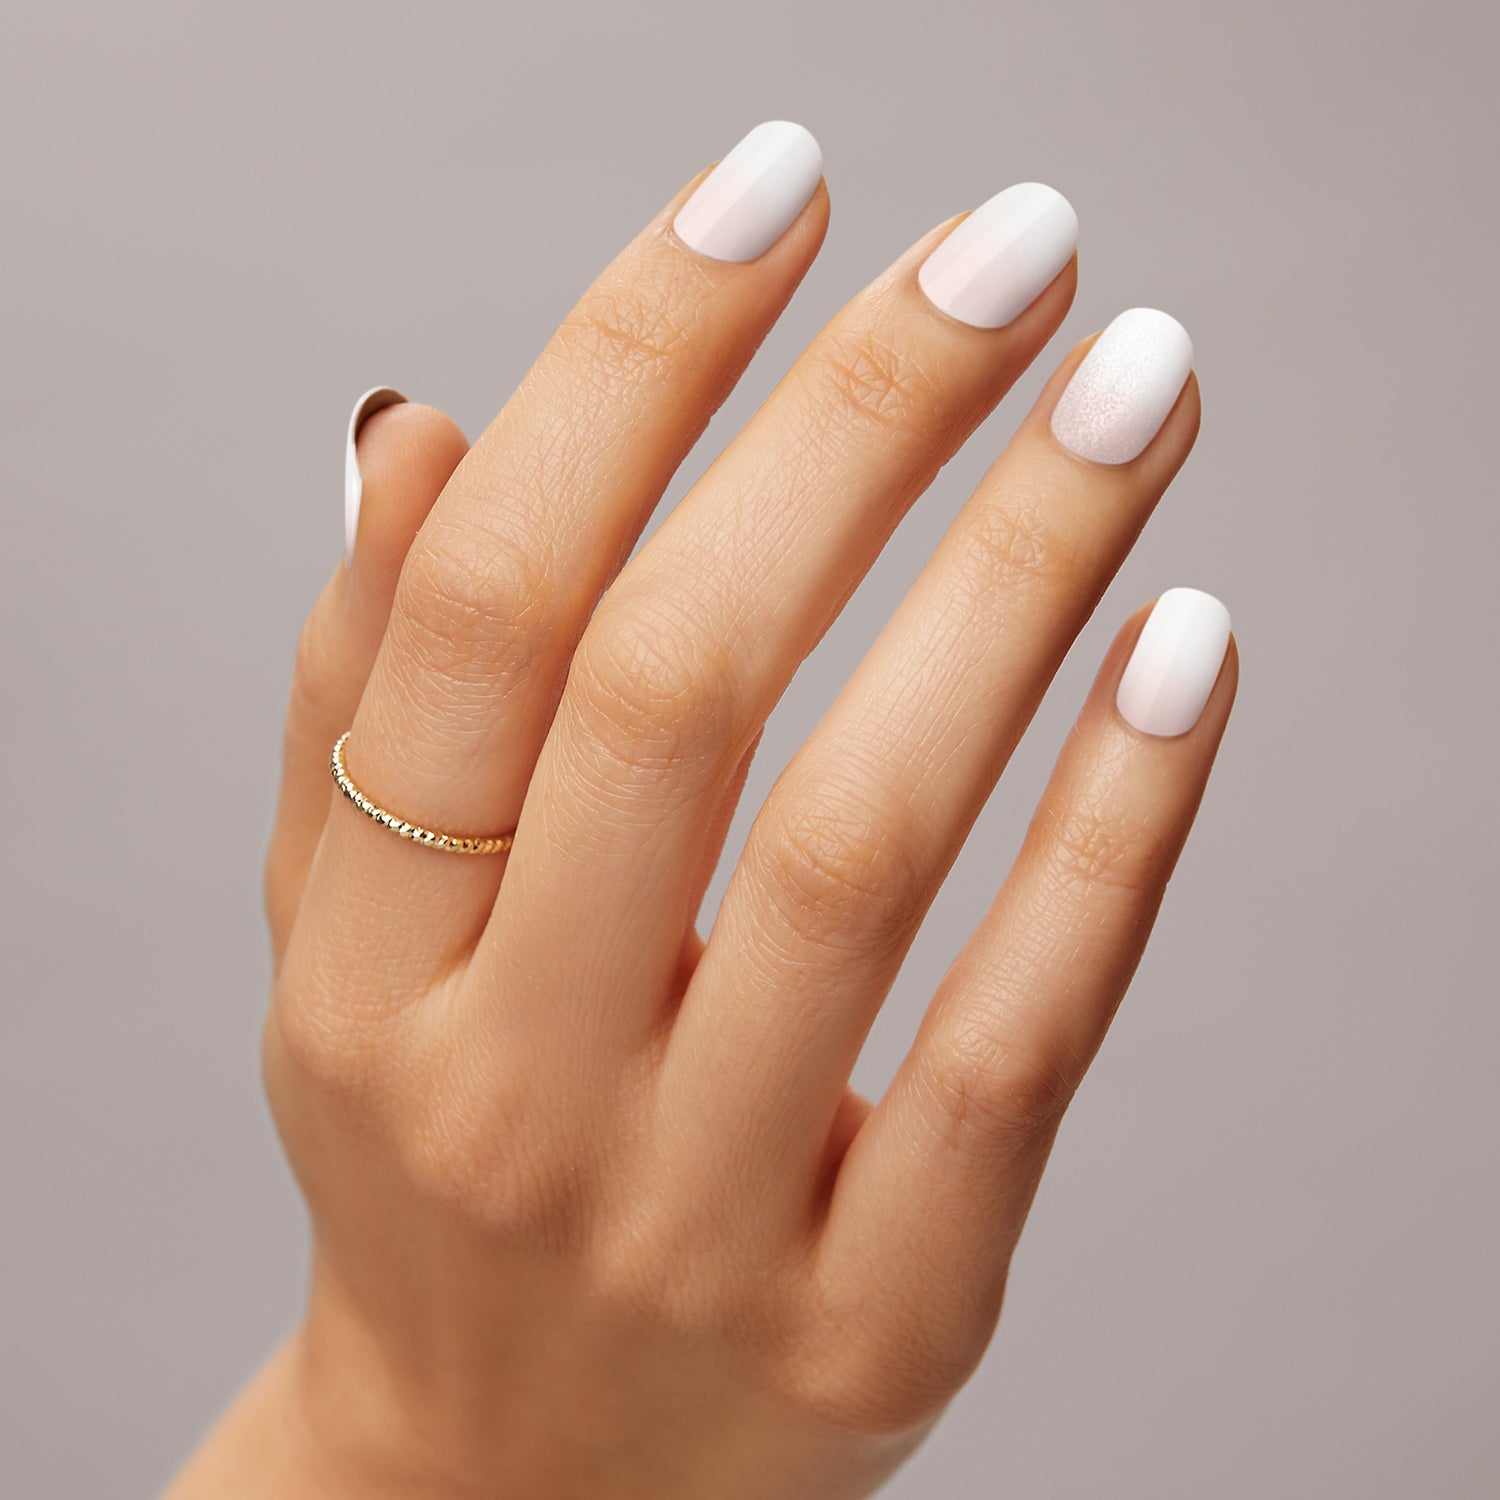 Quiet Luxury Is Coming For Your Manicure, Too